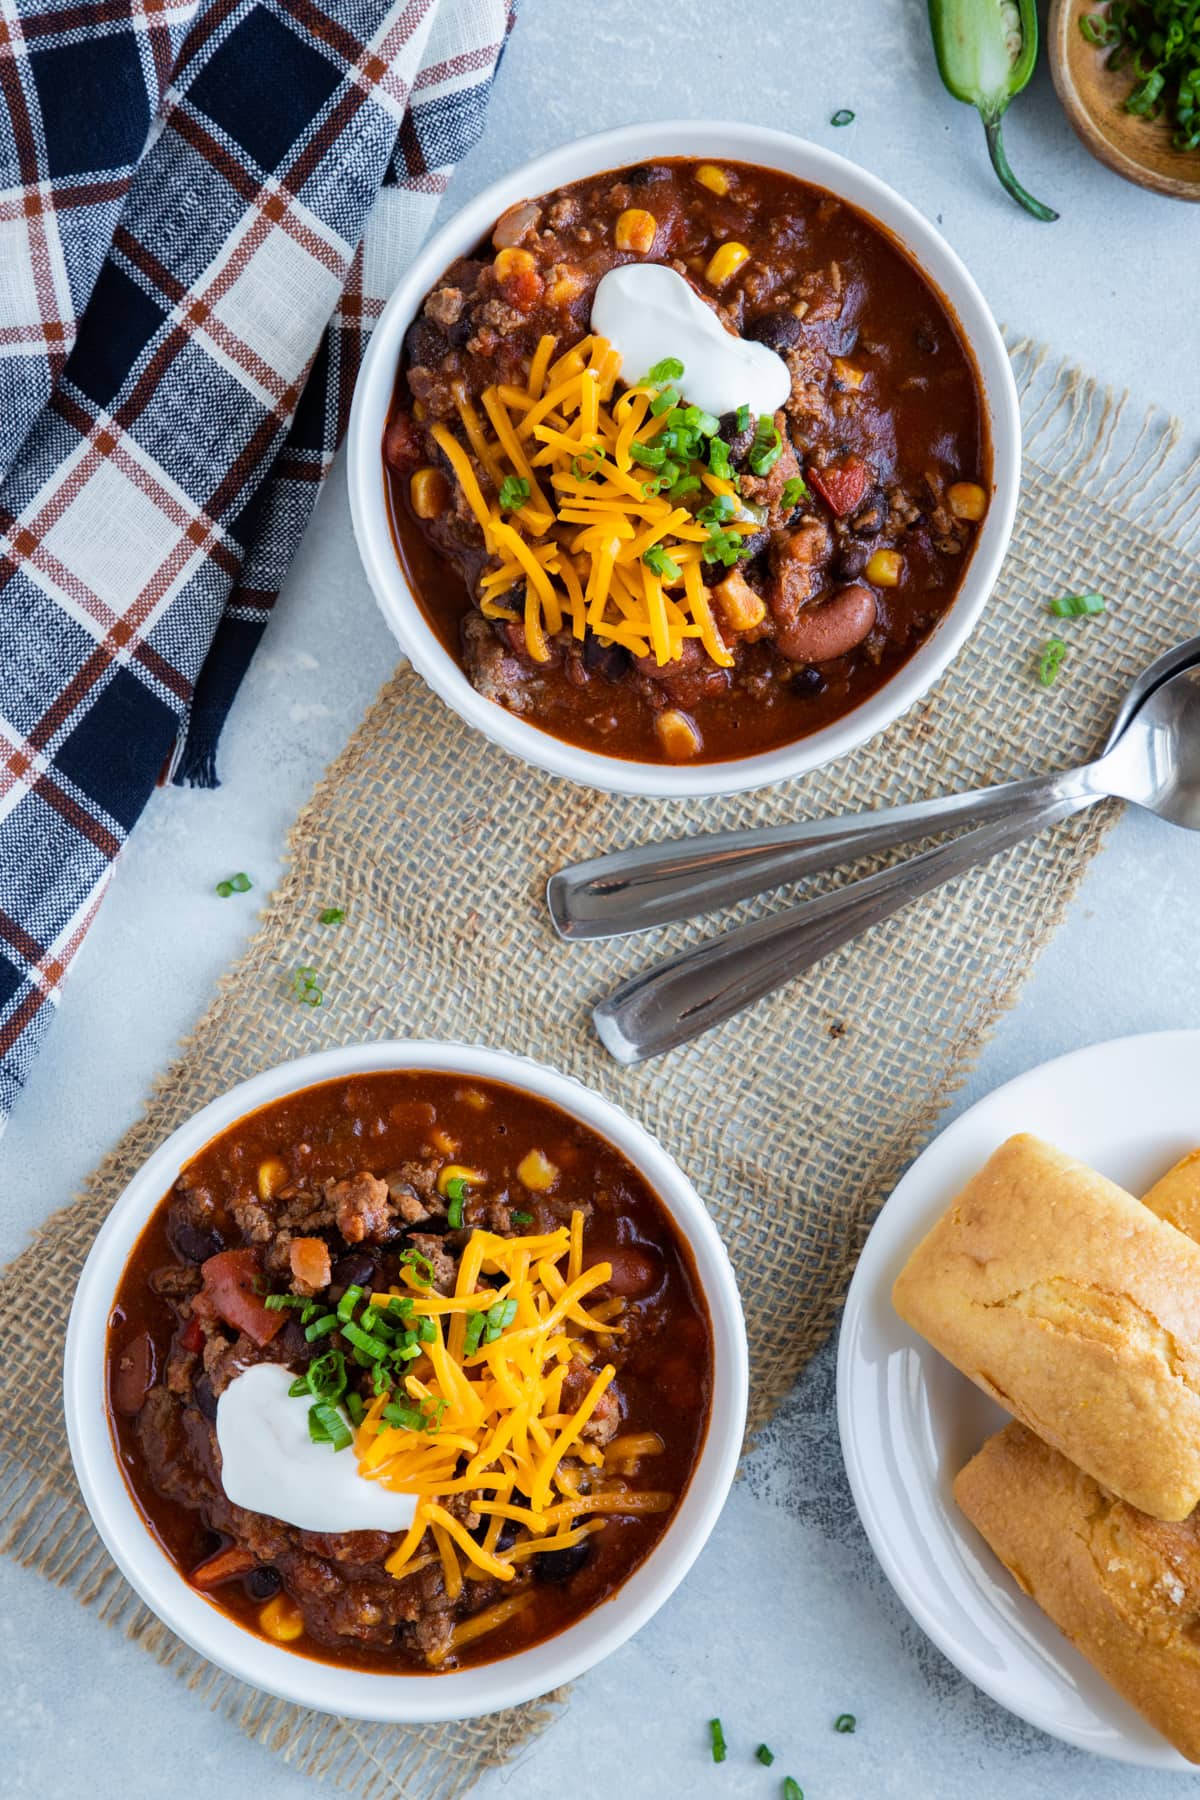 Best Slow Cooker Chili Recipe - How to Make Slow Cooker Chili